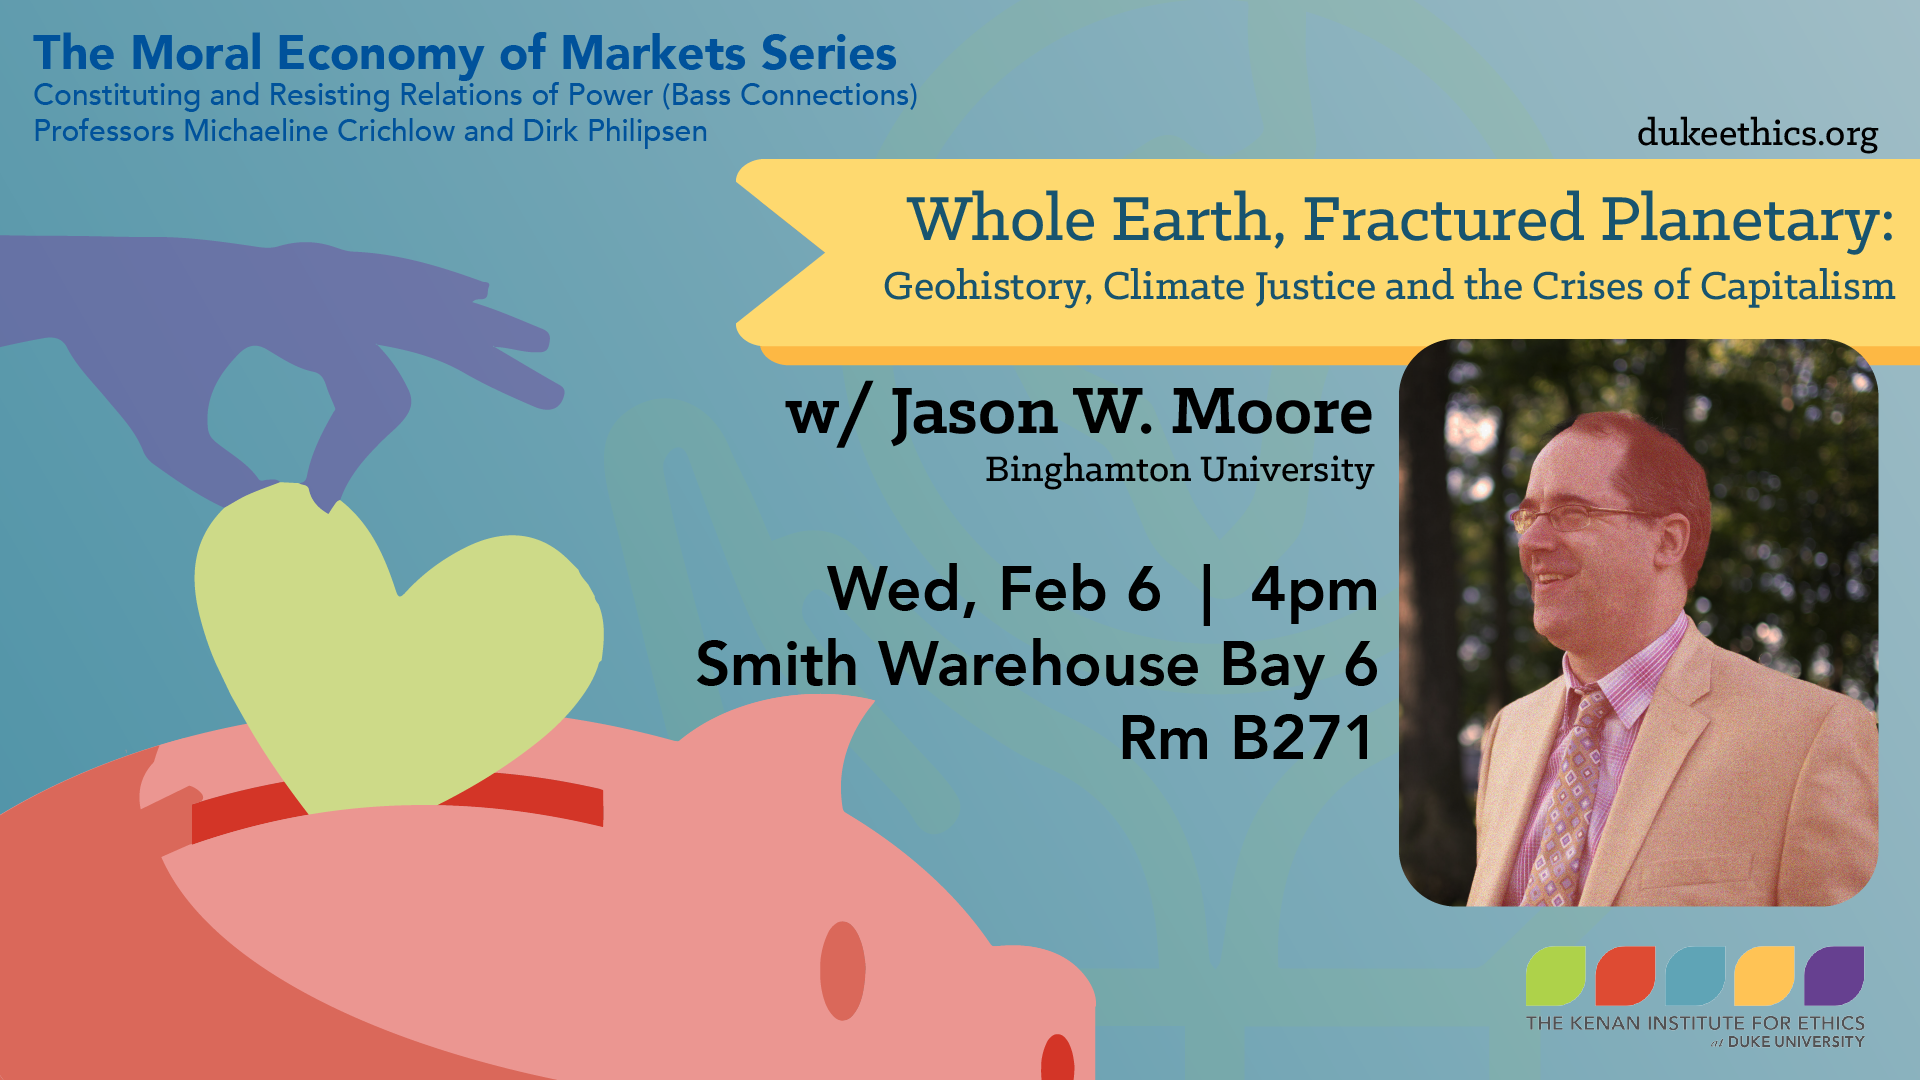 Whole Earth, Fractured Planetary: Geohistory, Climate Justice and the Crises of Capitalism with Jason W. Moore